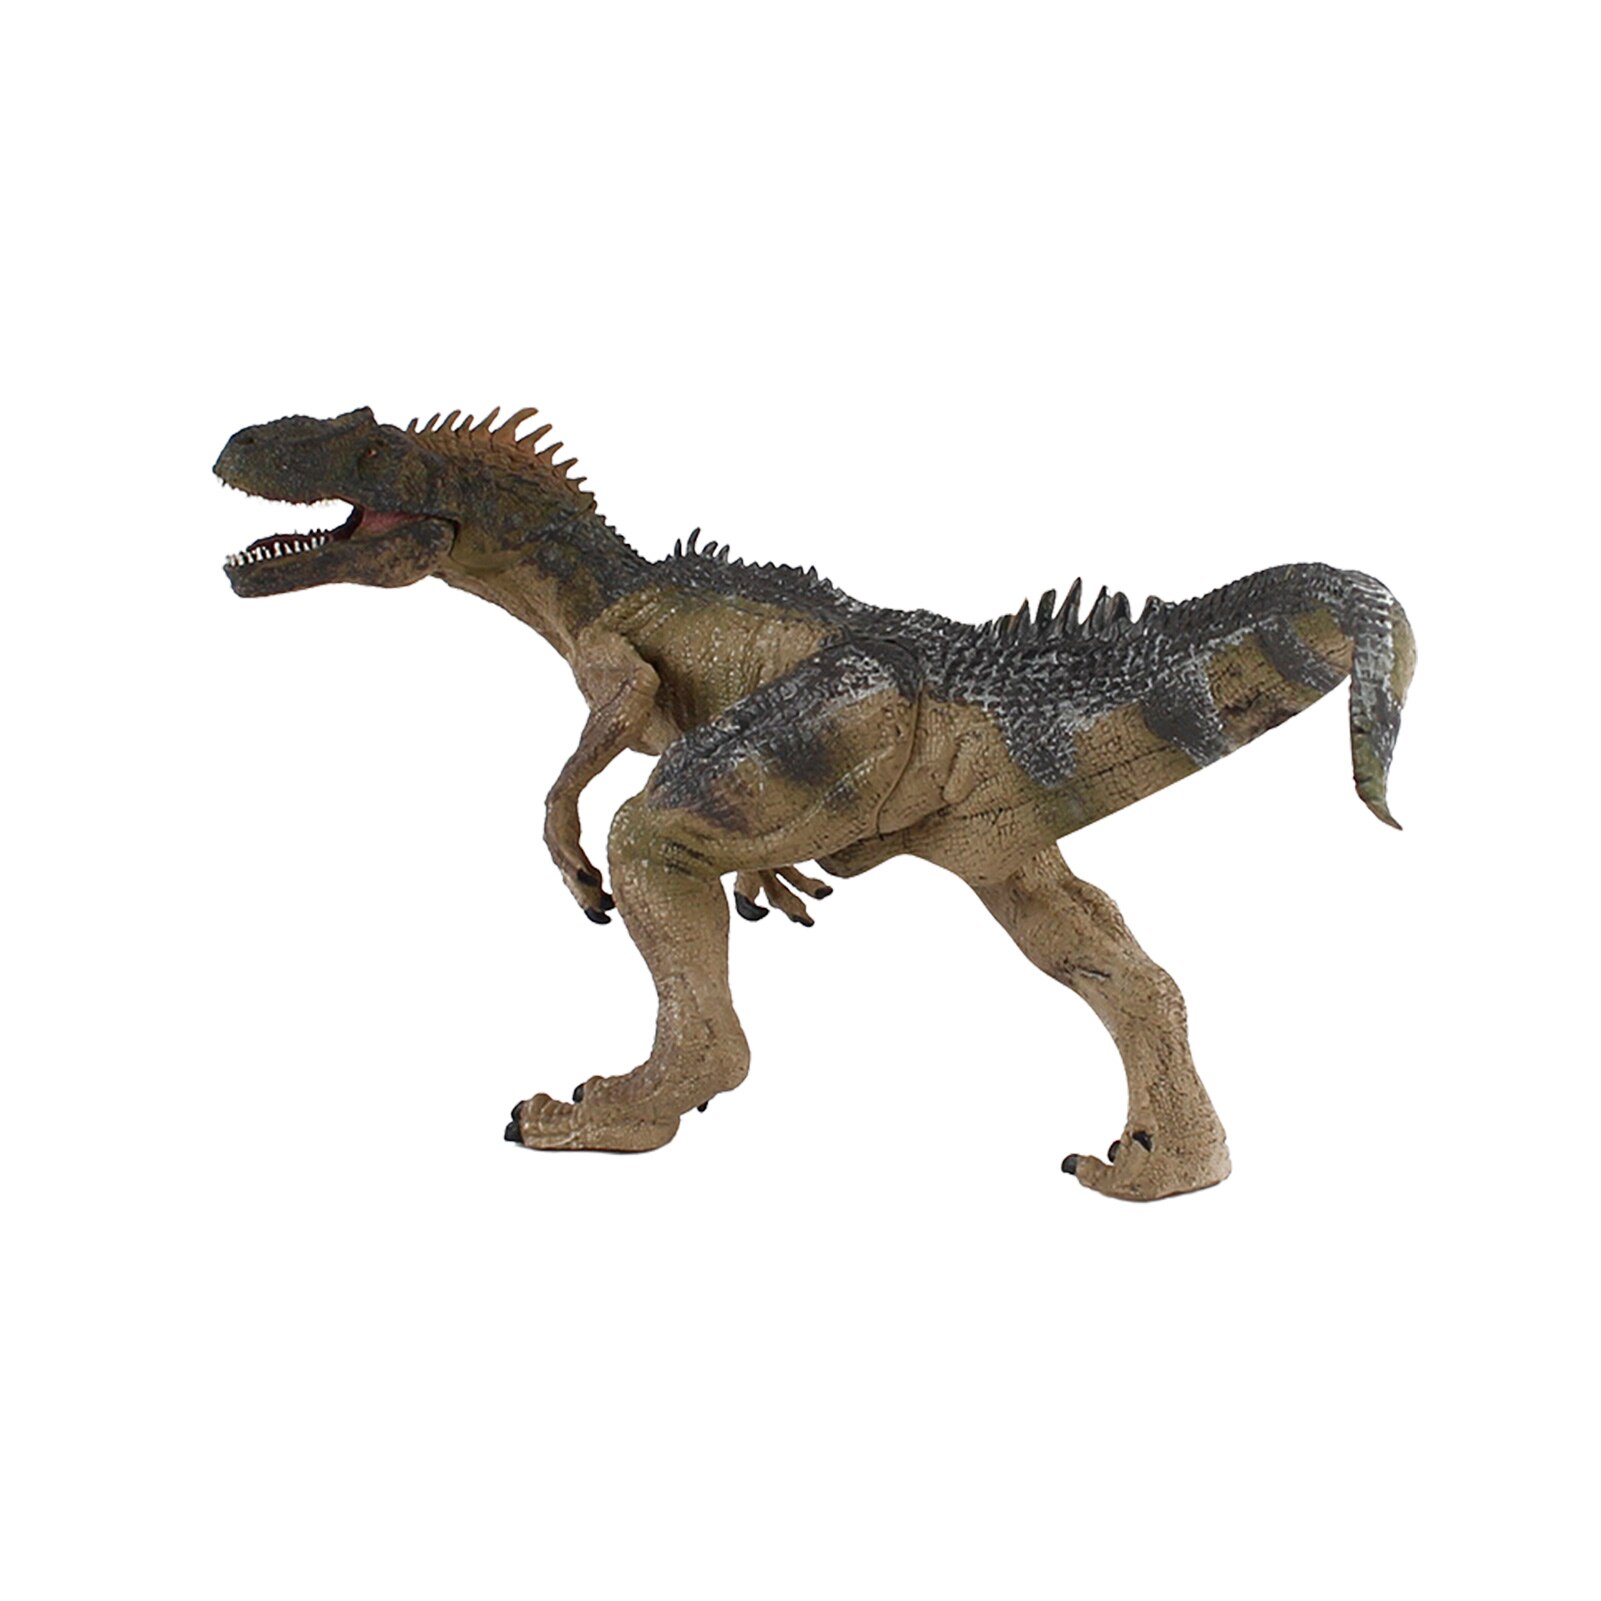 Kids Dinasors Toys Jurrassic World Dinosaur Simulated Dinosaur Figurine Storytelling Role Playing Collection Dinos Toy Gifts for alx